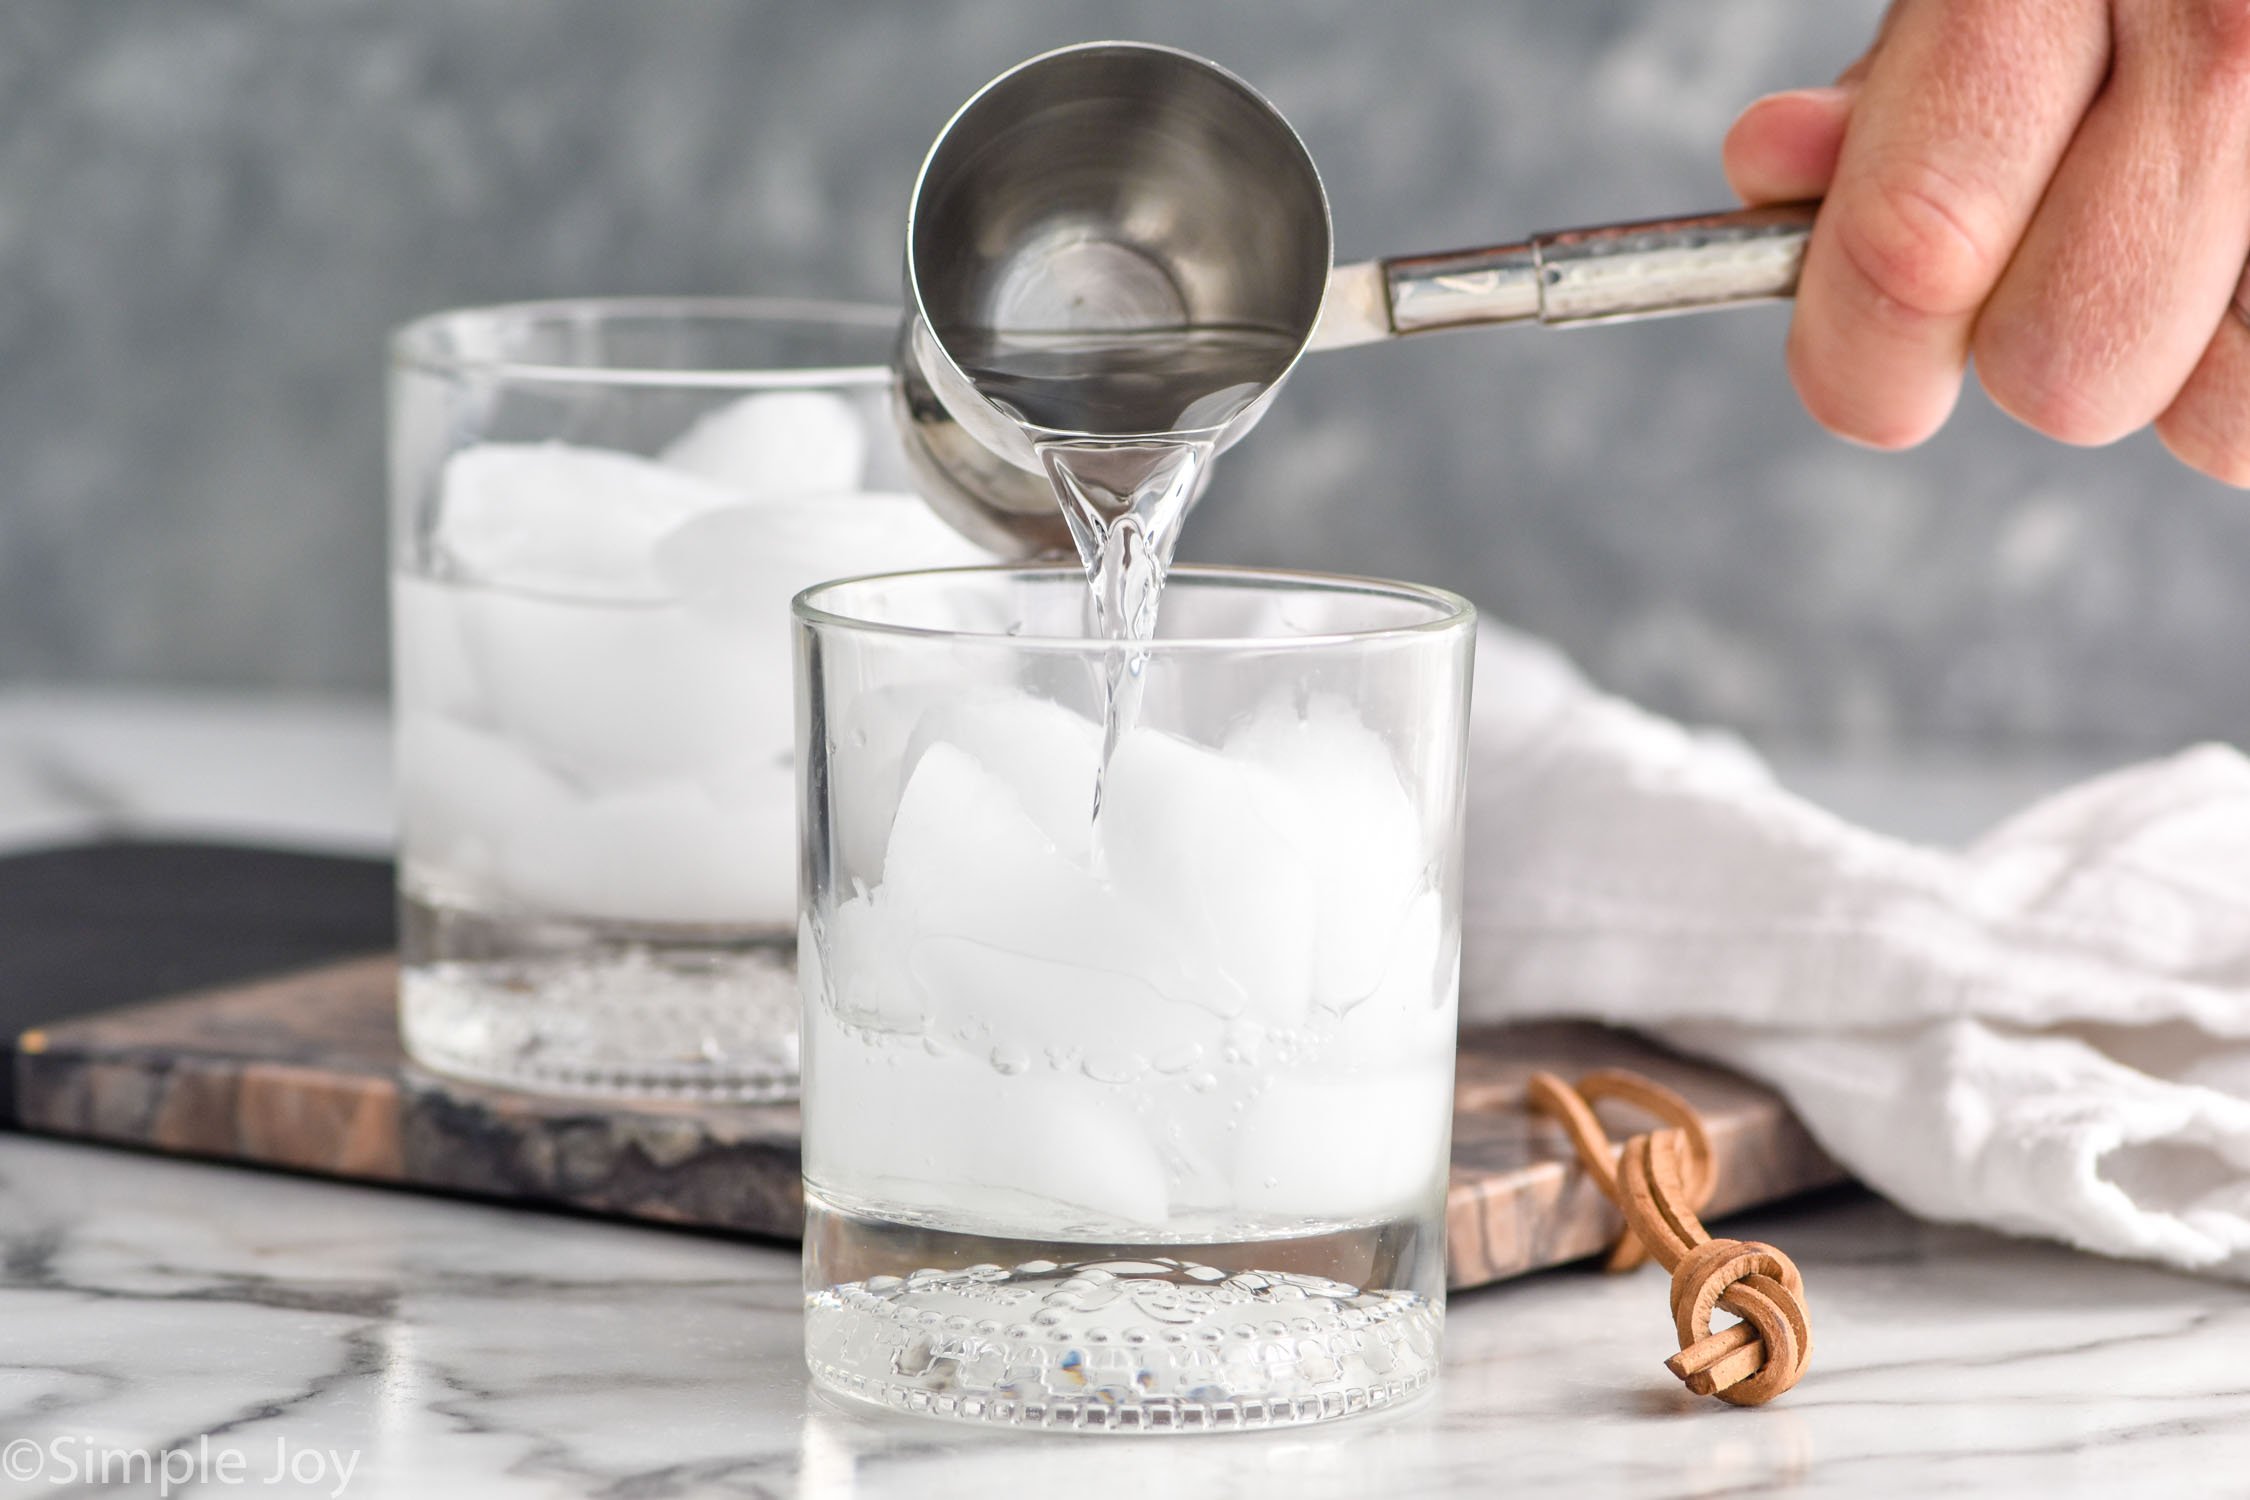 Man's hand pouring vodka into a glass of ice to make a white russian